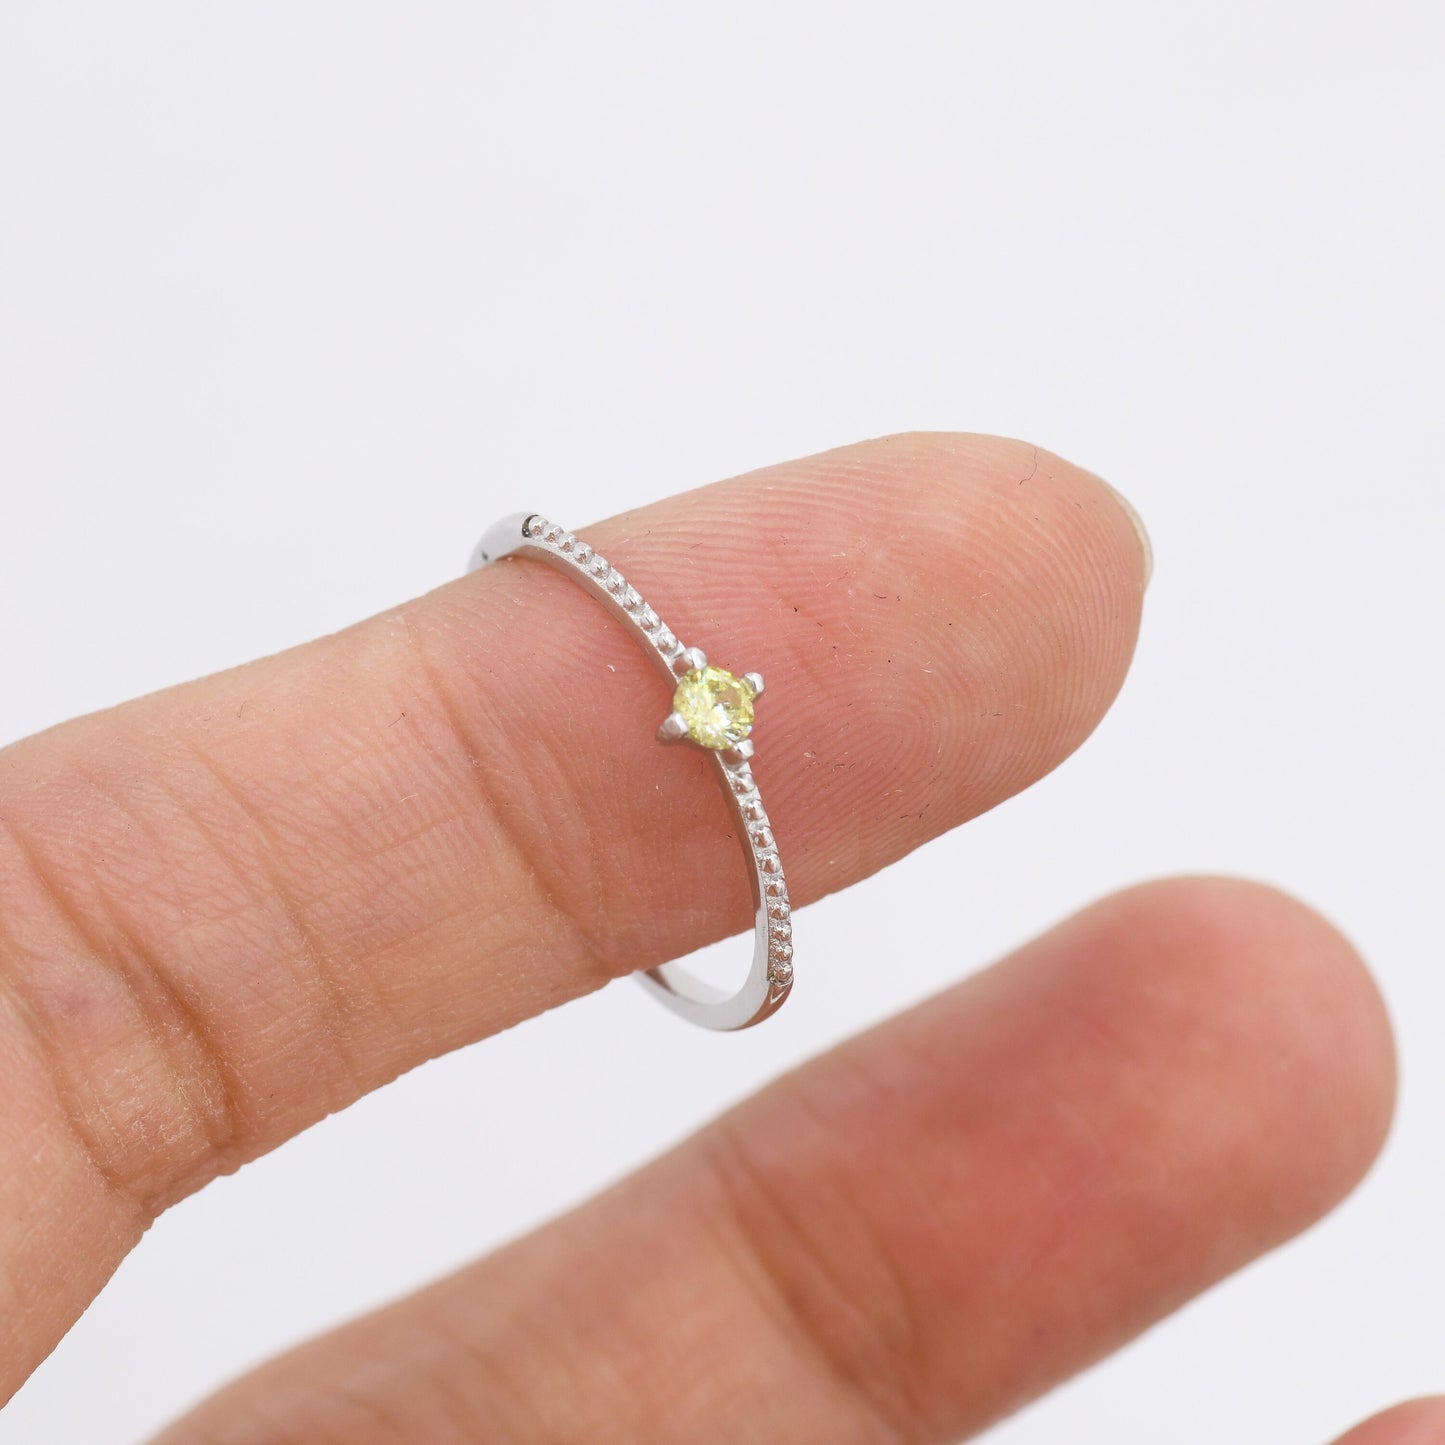 Peridot Green CZ Ring in Sterling Silver, Silver or Gold, Delicate Stacking Ring,  Green CZ Skinny Band, Size US 6 - 8, August Birthstone